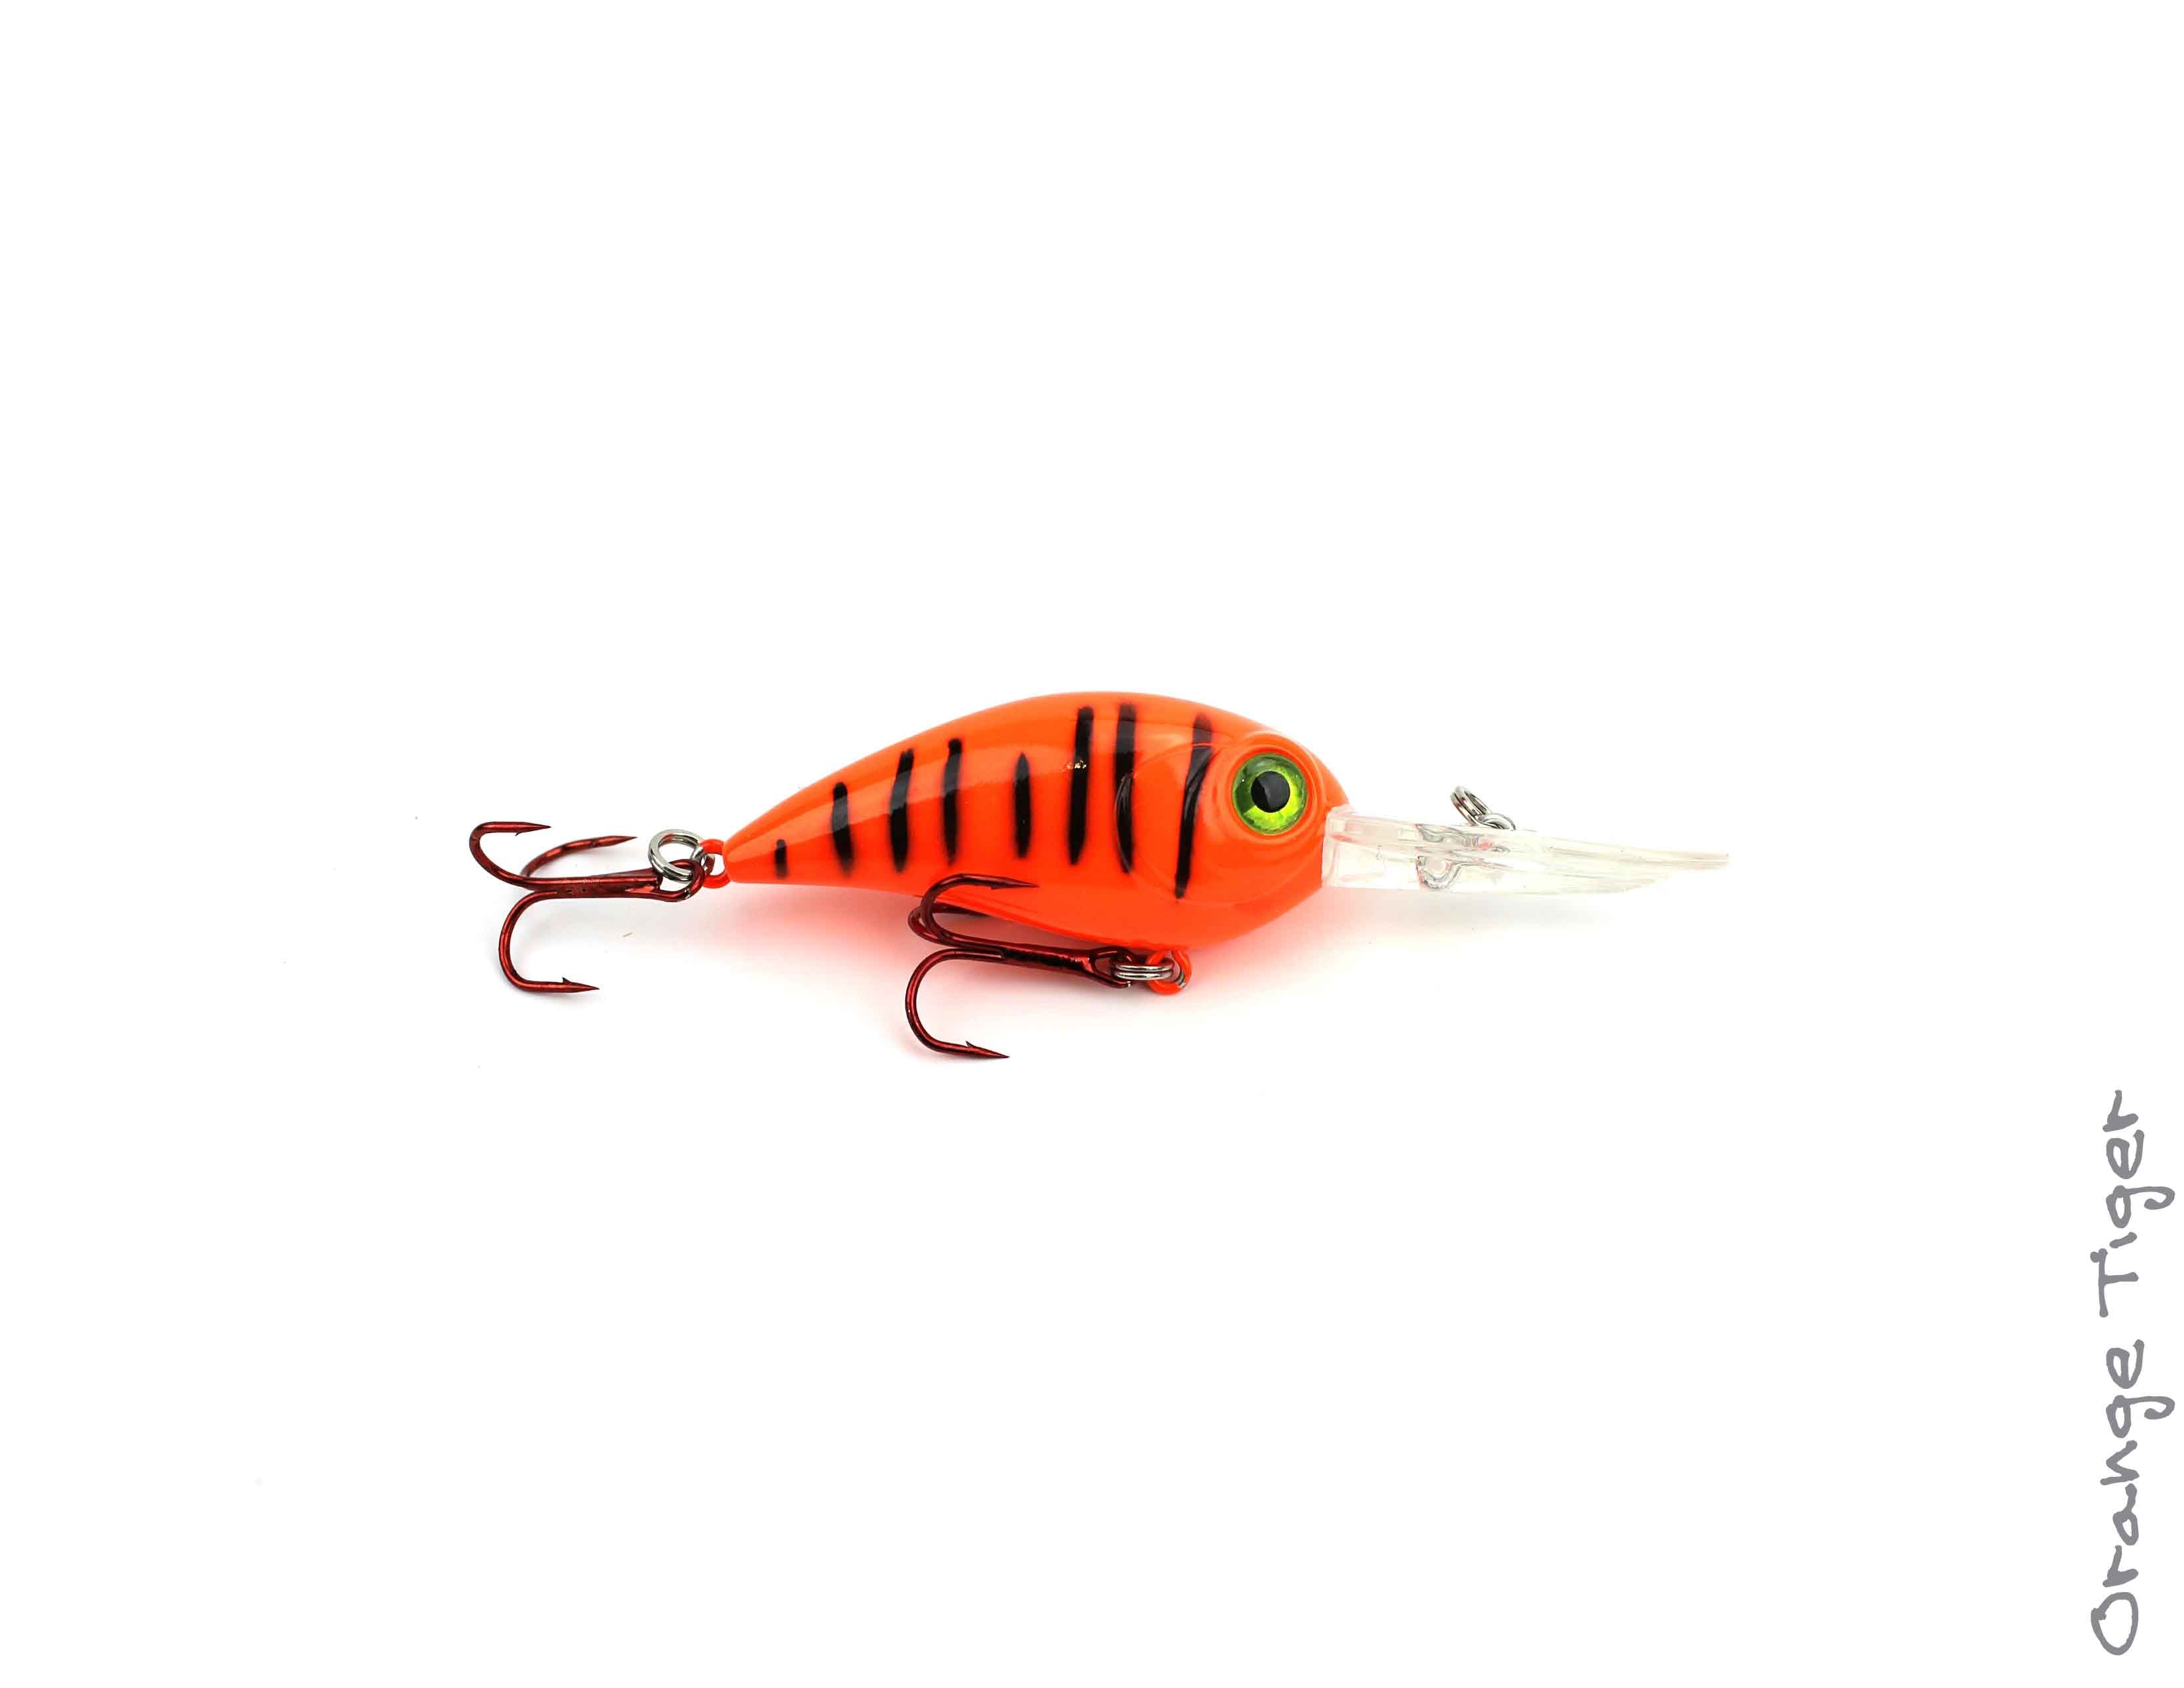 NUOMI Crankbait Fishing Lures Bass Hard Topwater Panfish/Crappie Lure Hooks  Artificial Baits 5 Pieces Mini Fishing Tackle